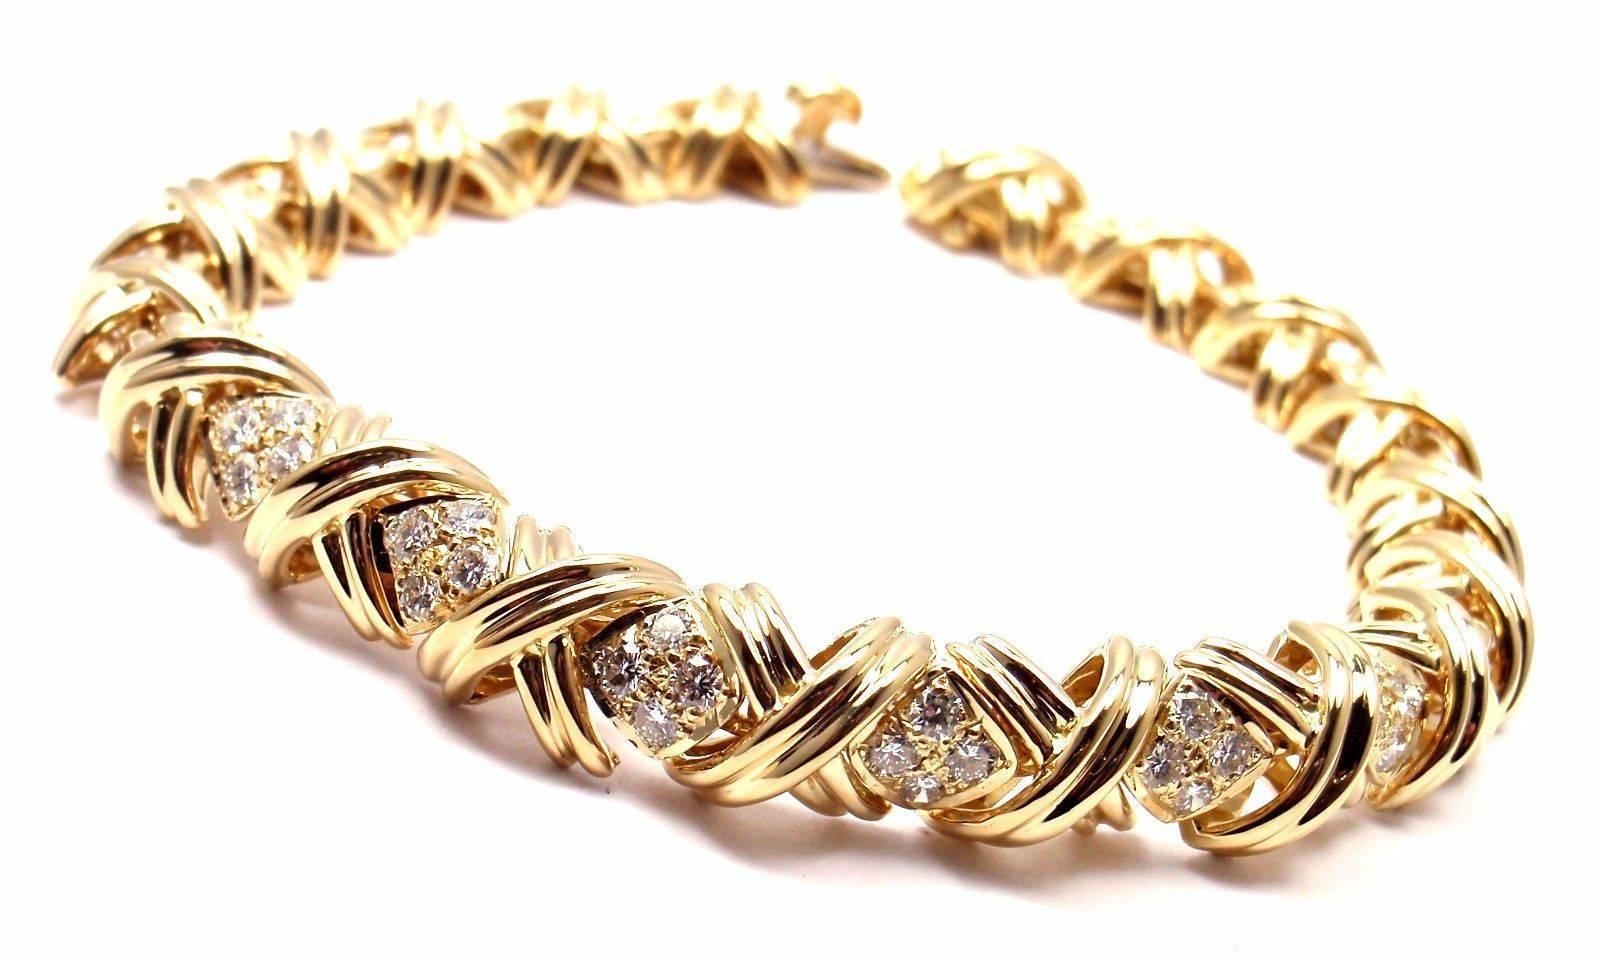 18k Yellow Gold Signature X Diamond Bracelet by Tiffany & Co.
With 24 round brilliant cut diamonds VS1 clarity, G color total weight approx. .72ct

Details:
Weight: 29.4 grams
Length: 7